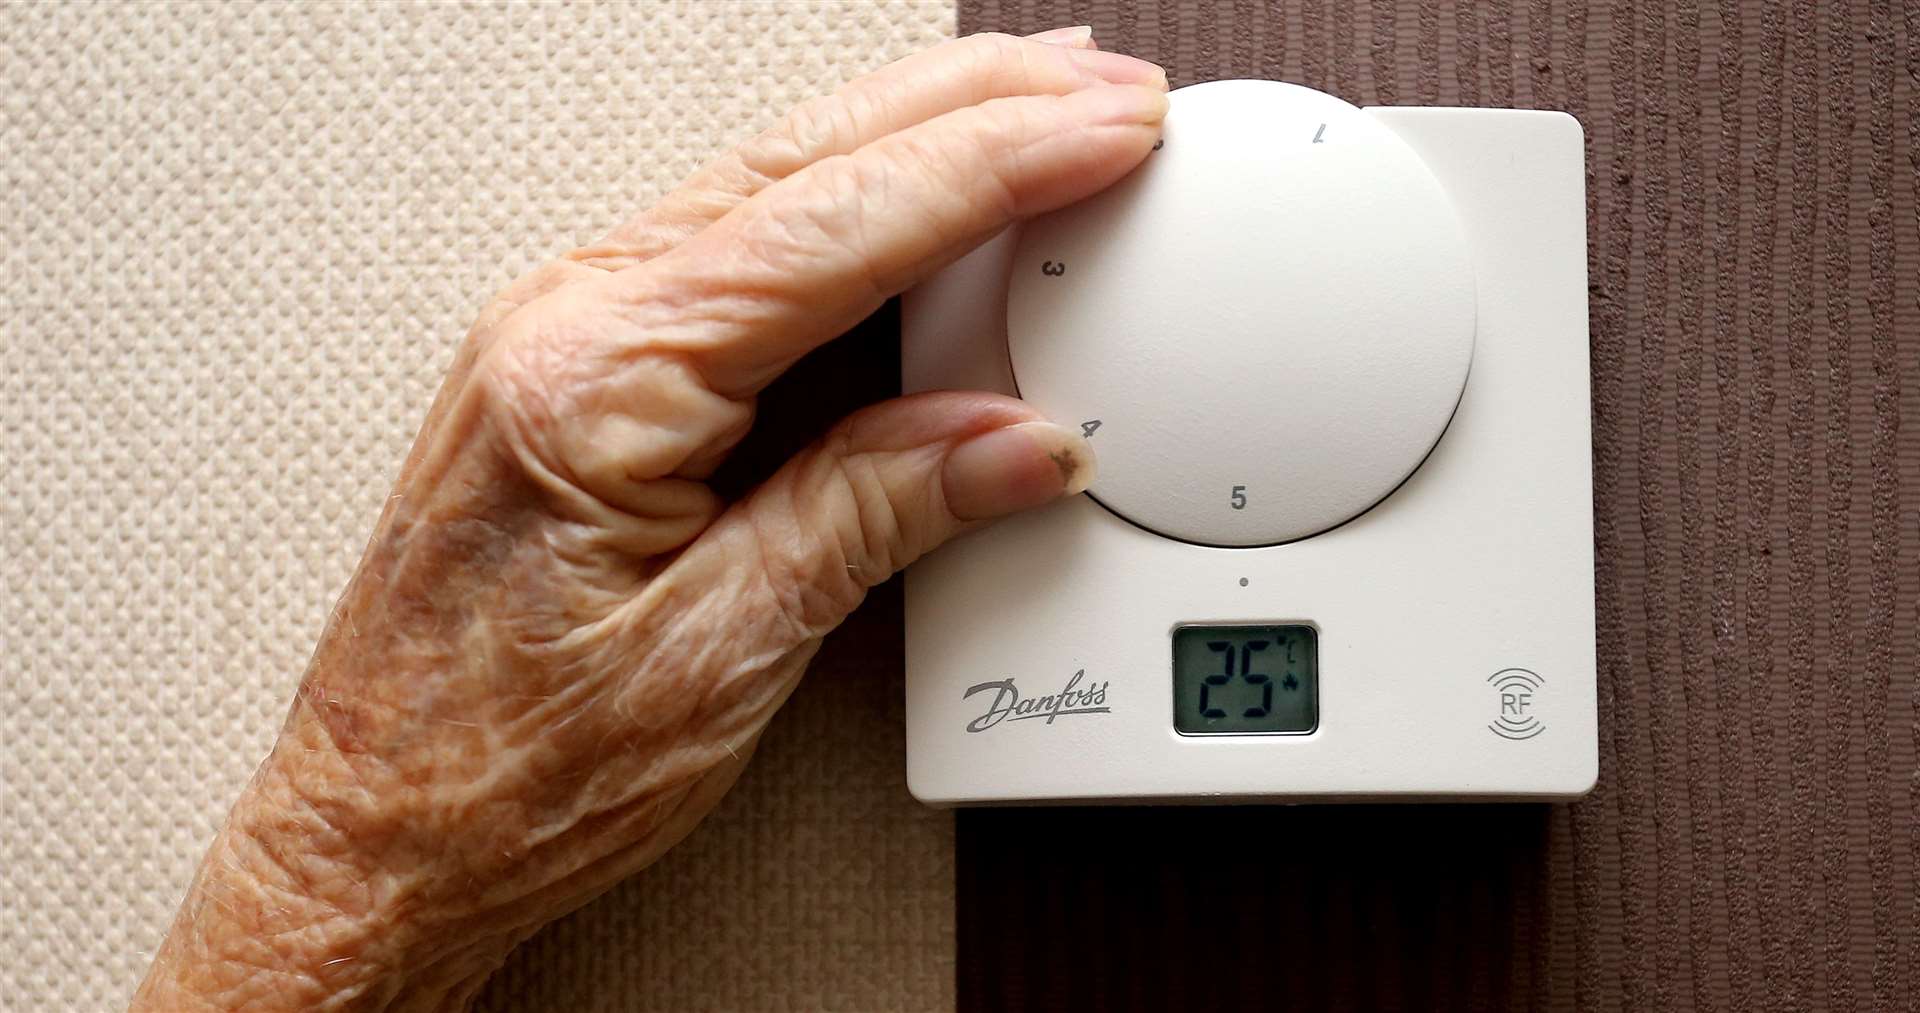 Heating costs are expected to leave lots of families struggling to pay their bills this winter